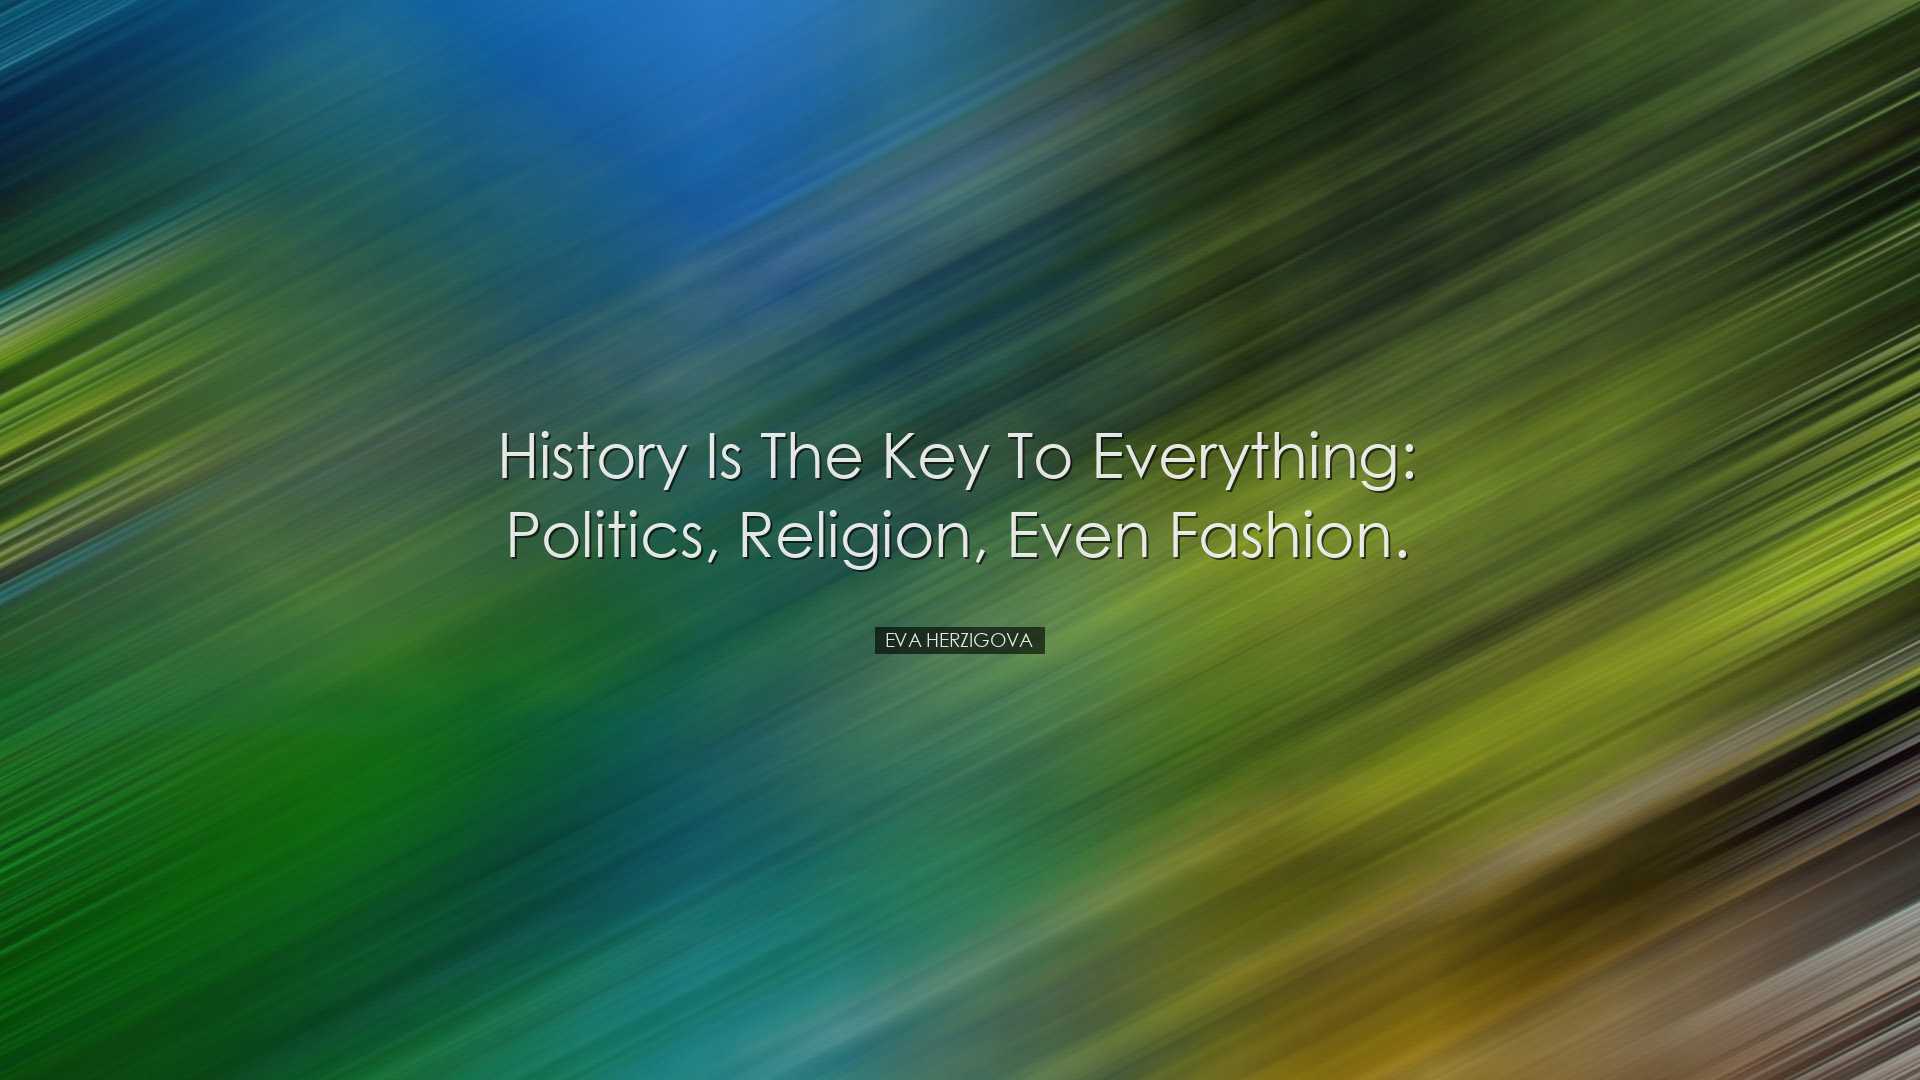 History is the key to everything: politics, religion, even fashion